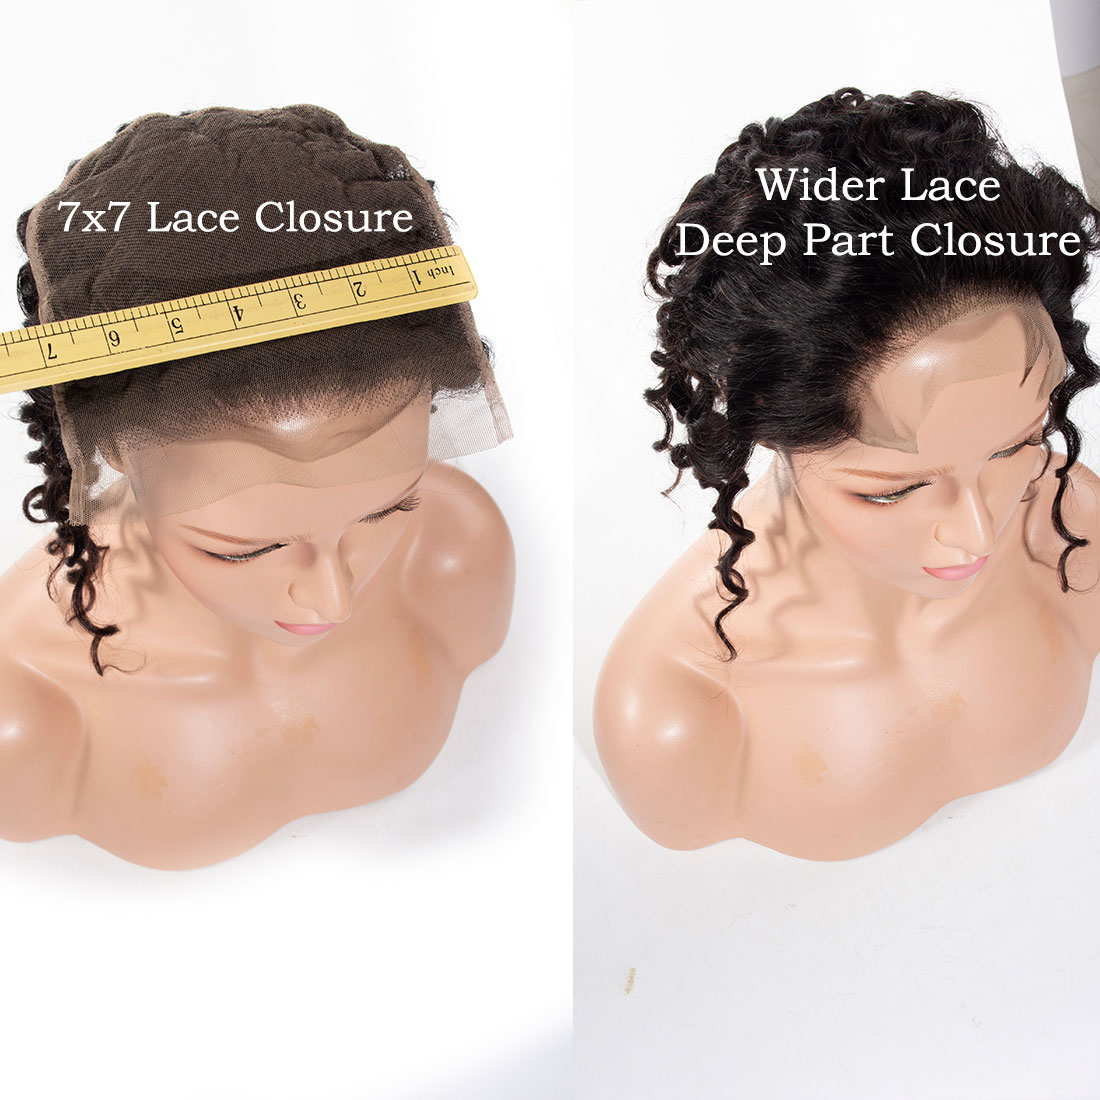 7×7 Water Wave Lace Closure